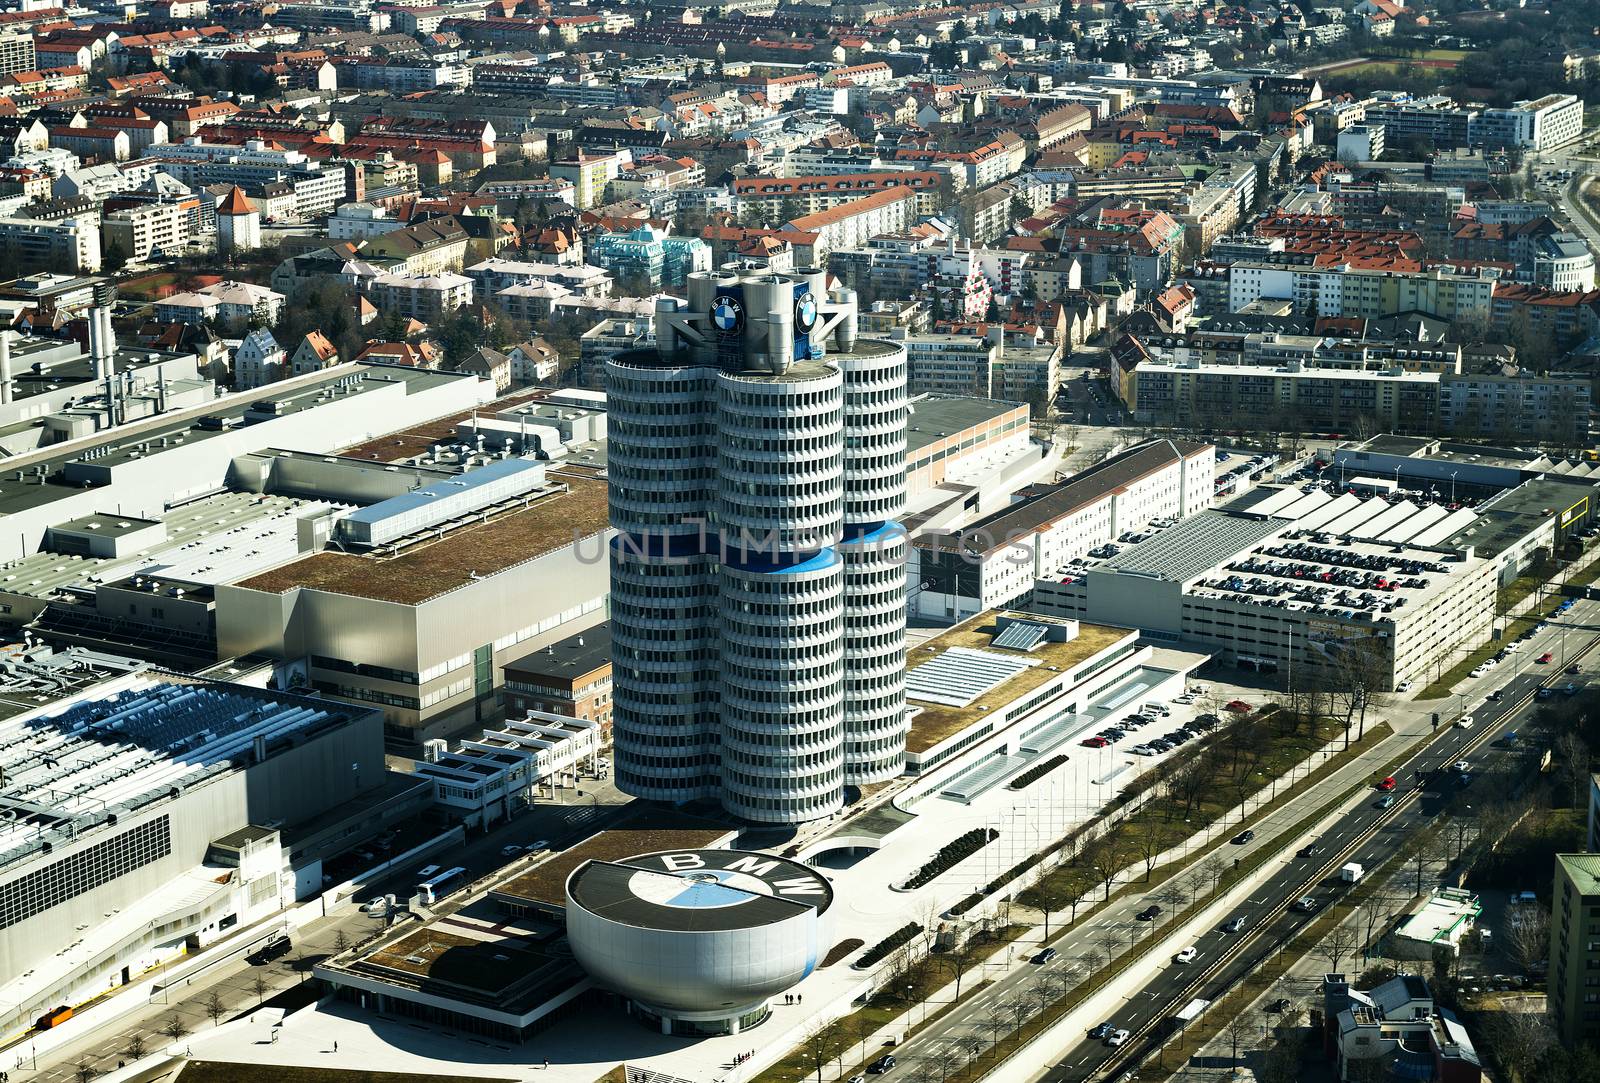 MUNICH, GERMANY - MARCH 10 : BMW Headquarters on March 10, 2015. The four vertical cylinders building is a Munich landmark which is world headquarters for the Bavarian automaker.